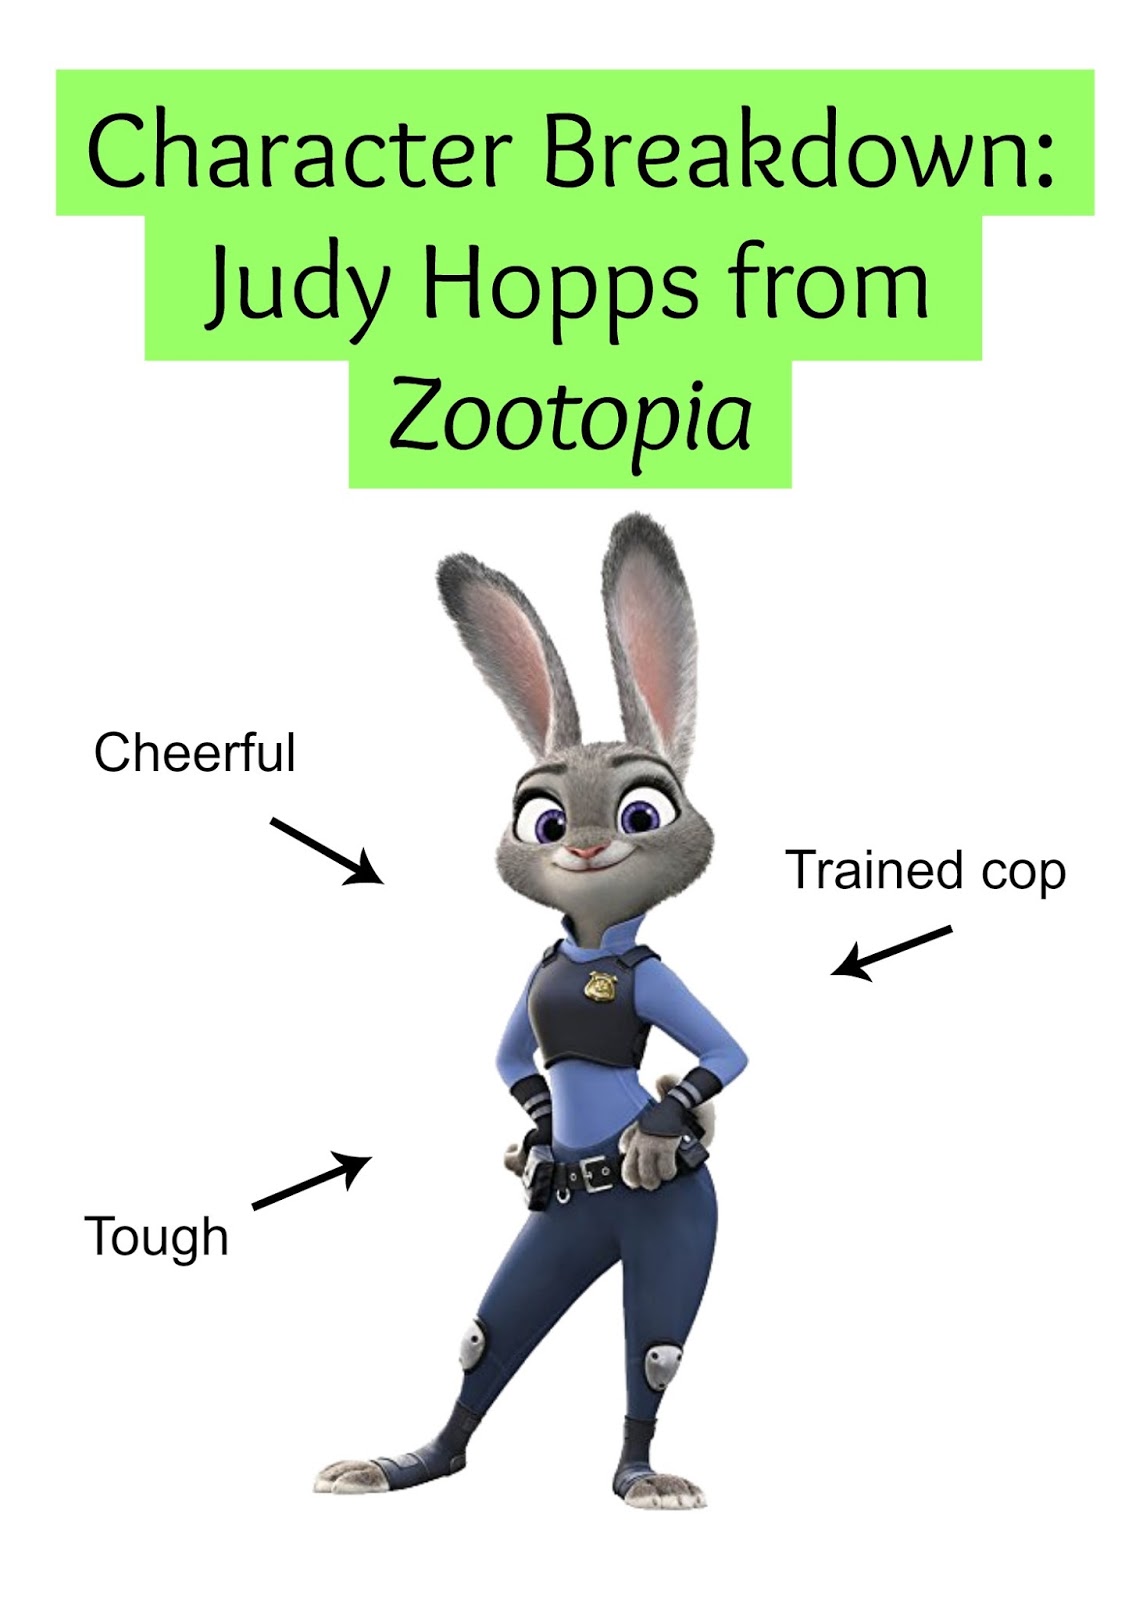 Of judy hopps pictures 71+ Zootopia